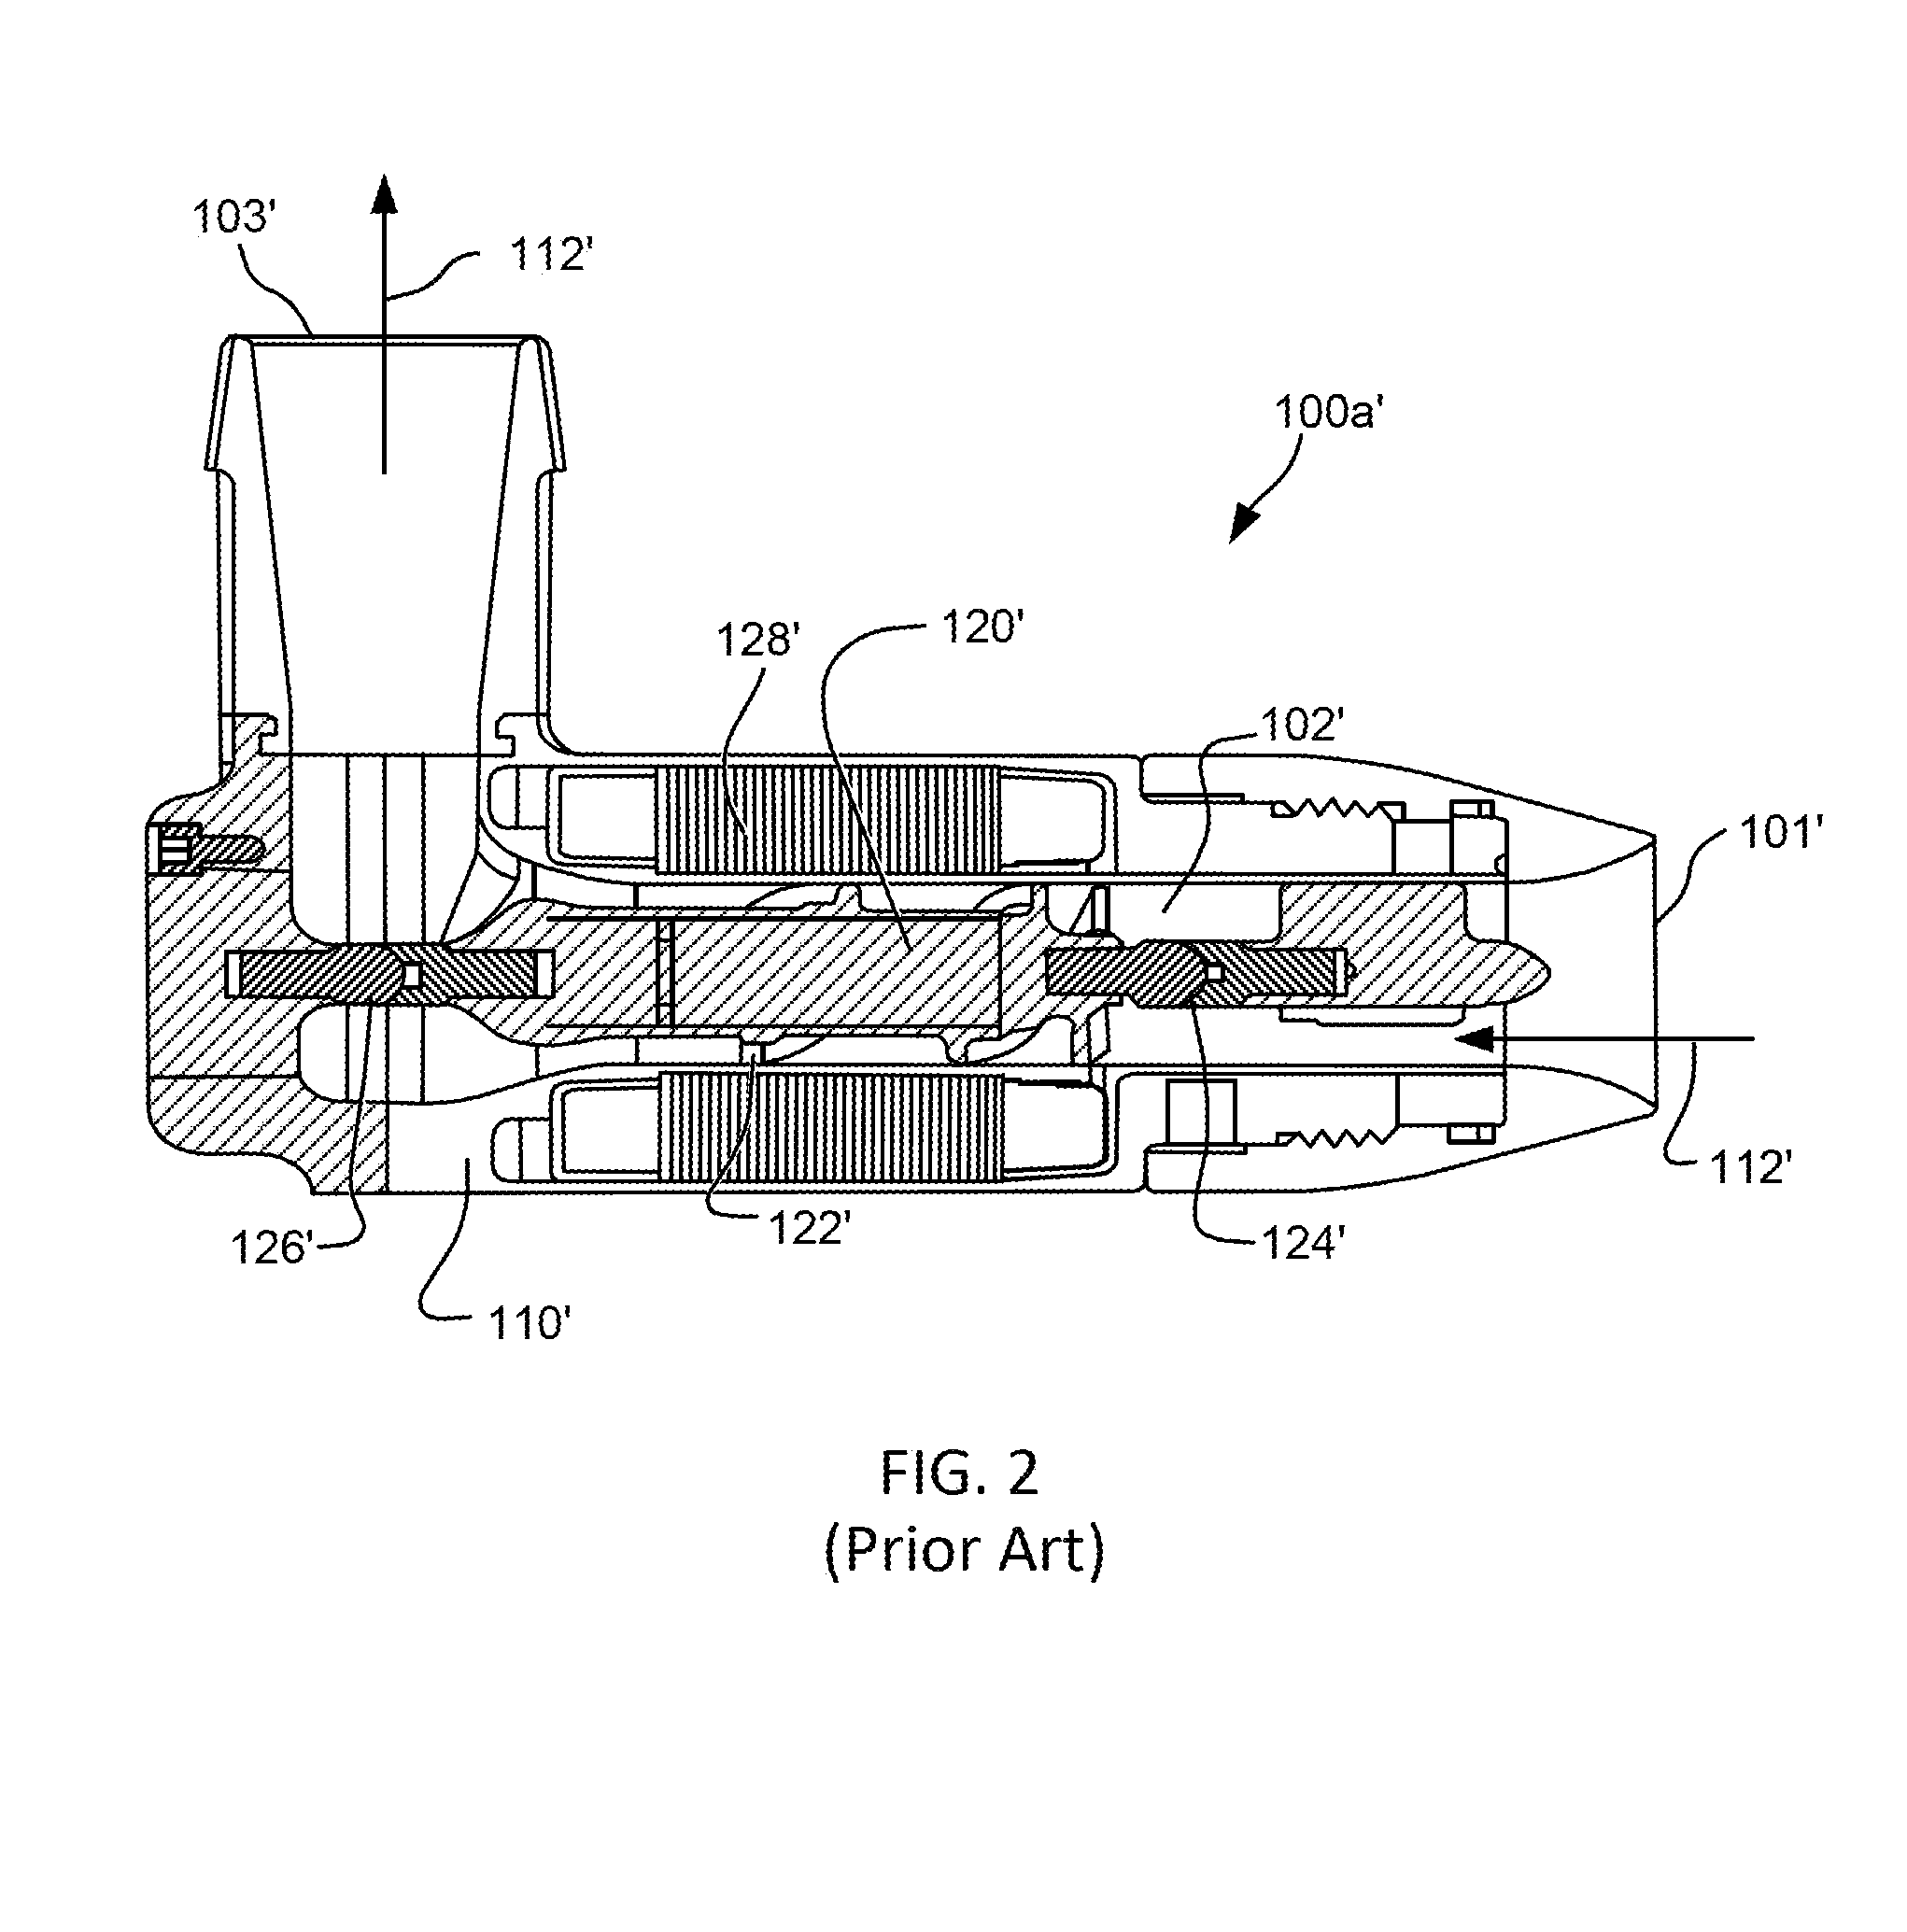 Cantilevered rotor pump and methods for axial flow blood pumping